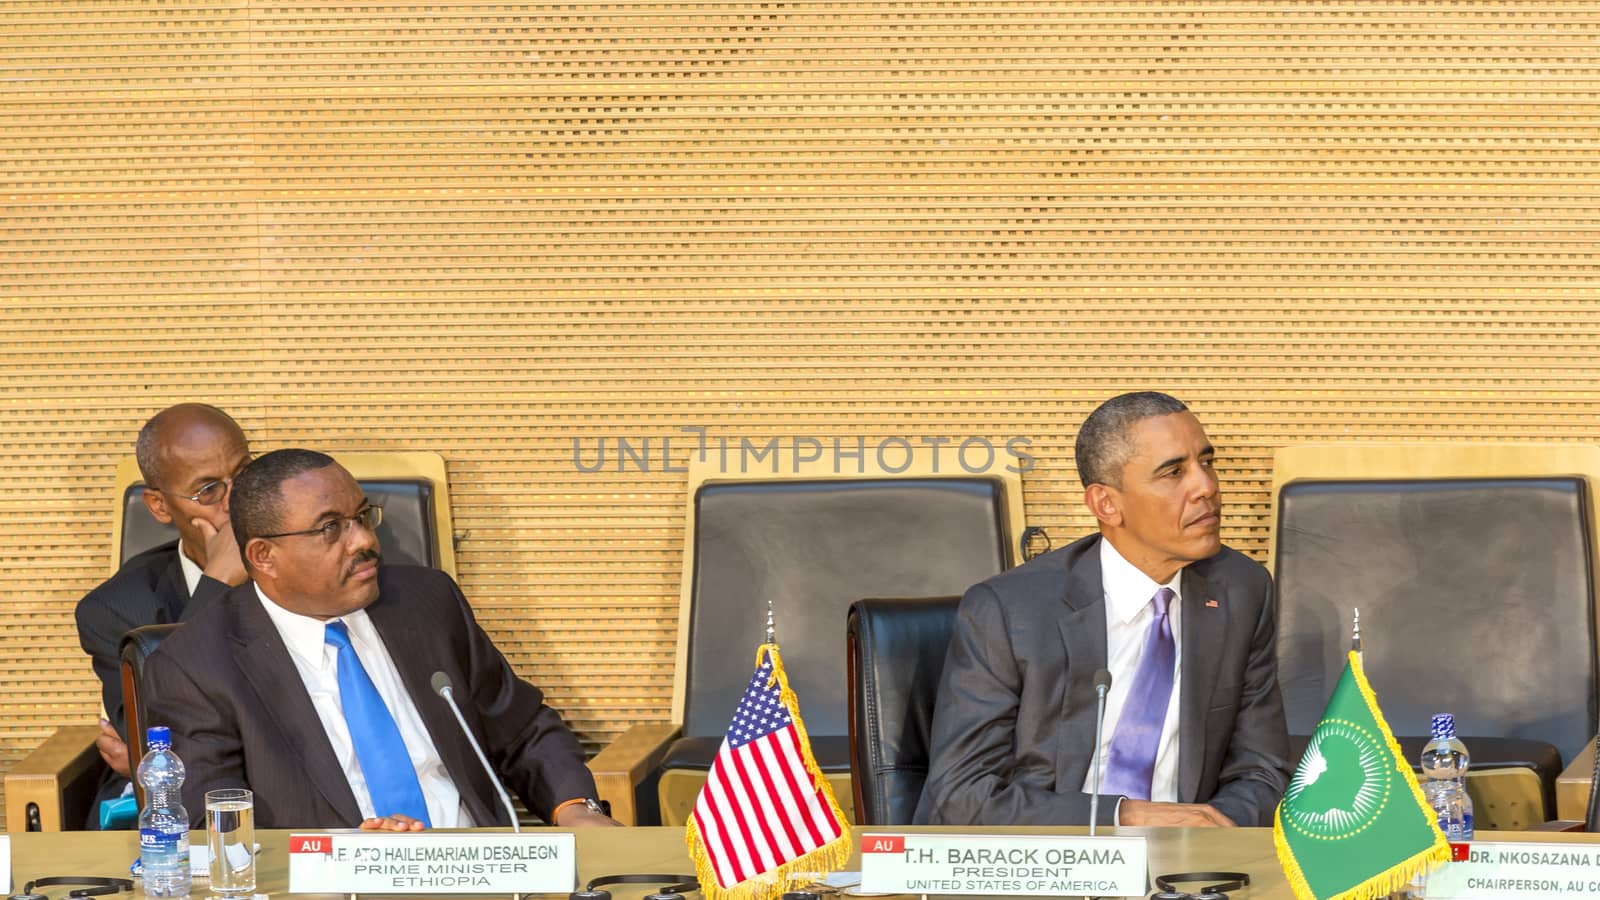 Addis Ababa - July 28: President Obama and Prime Minister Hailemariam Desalegn attentively listen to the speech of H.E. Dr. Dlamini Zuma, Chairperson of the AUC, on July 28, 2015, in Addis Ababa, Ethiopia.